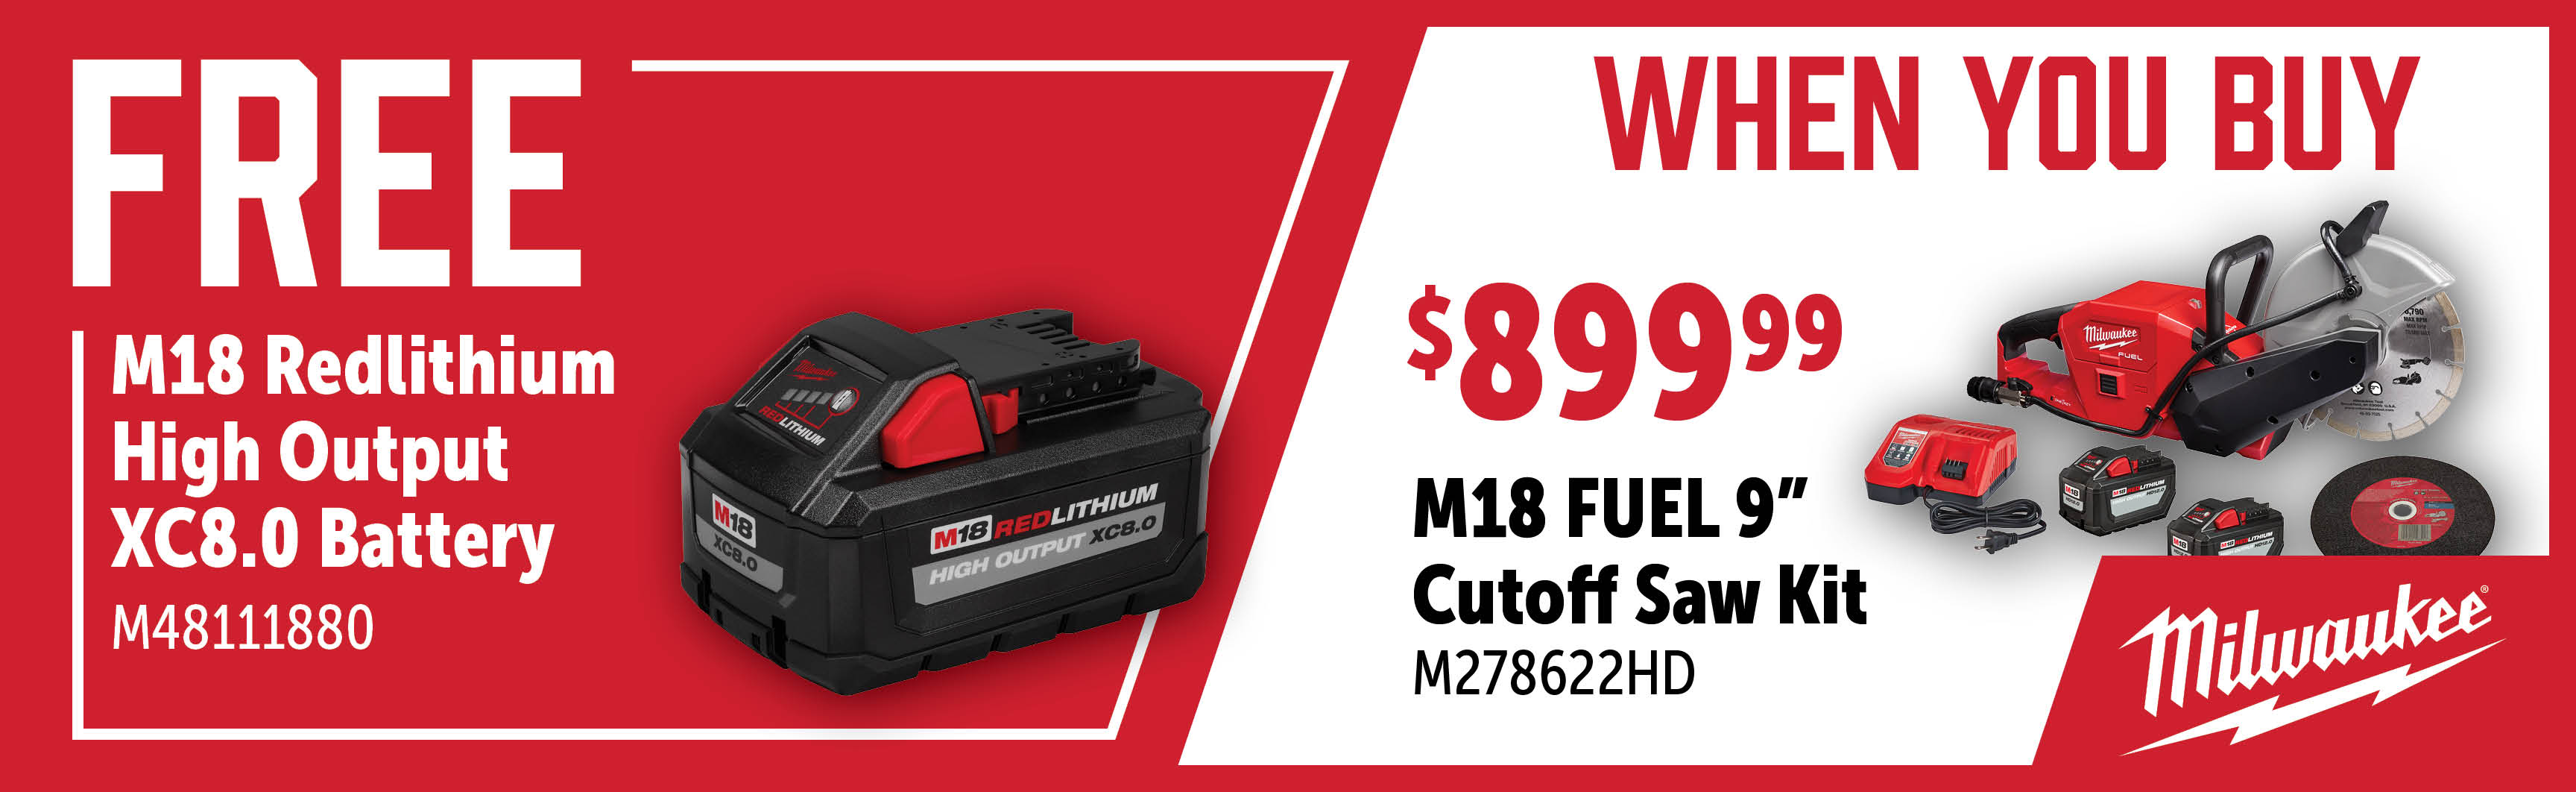 Milwaukee Aug-Oct: Buy a M278622HD and Get a Free M48111880